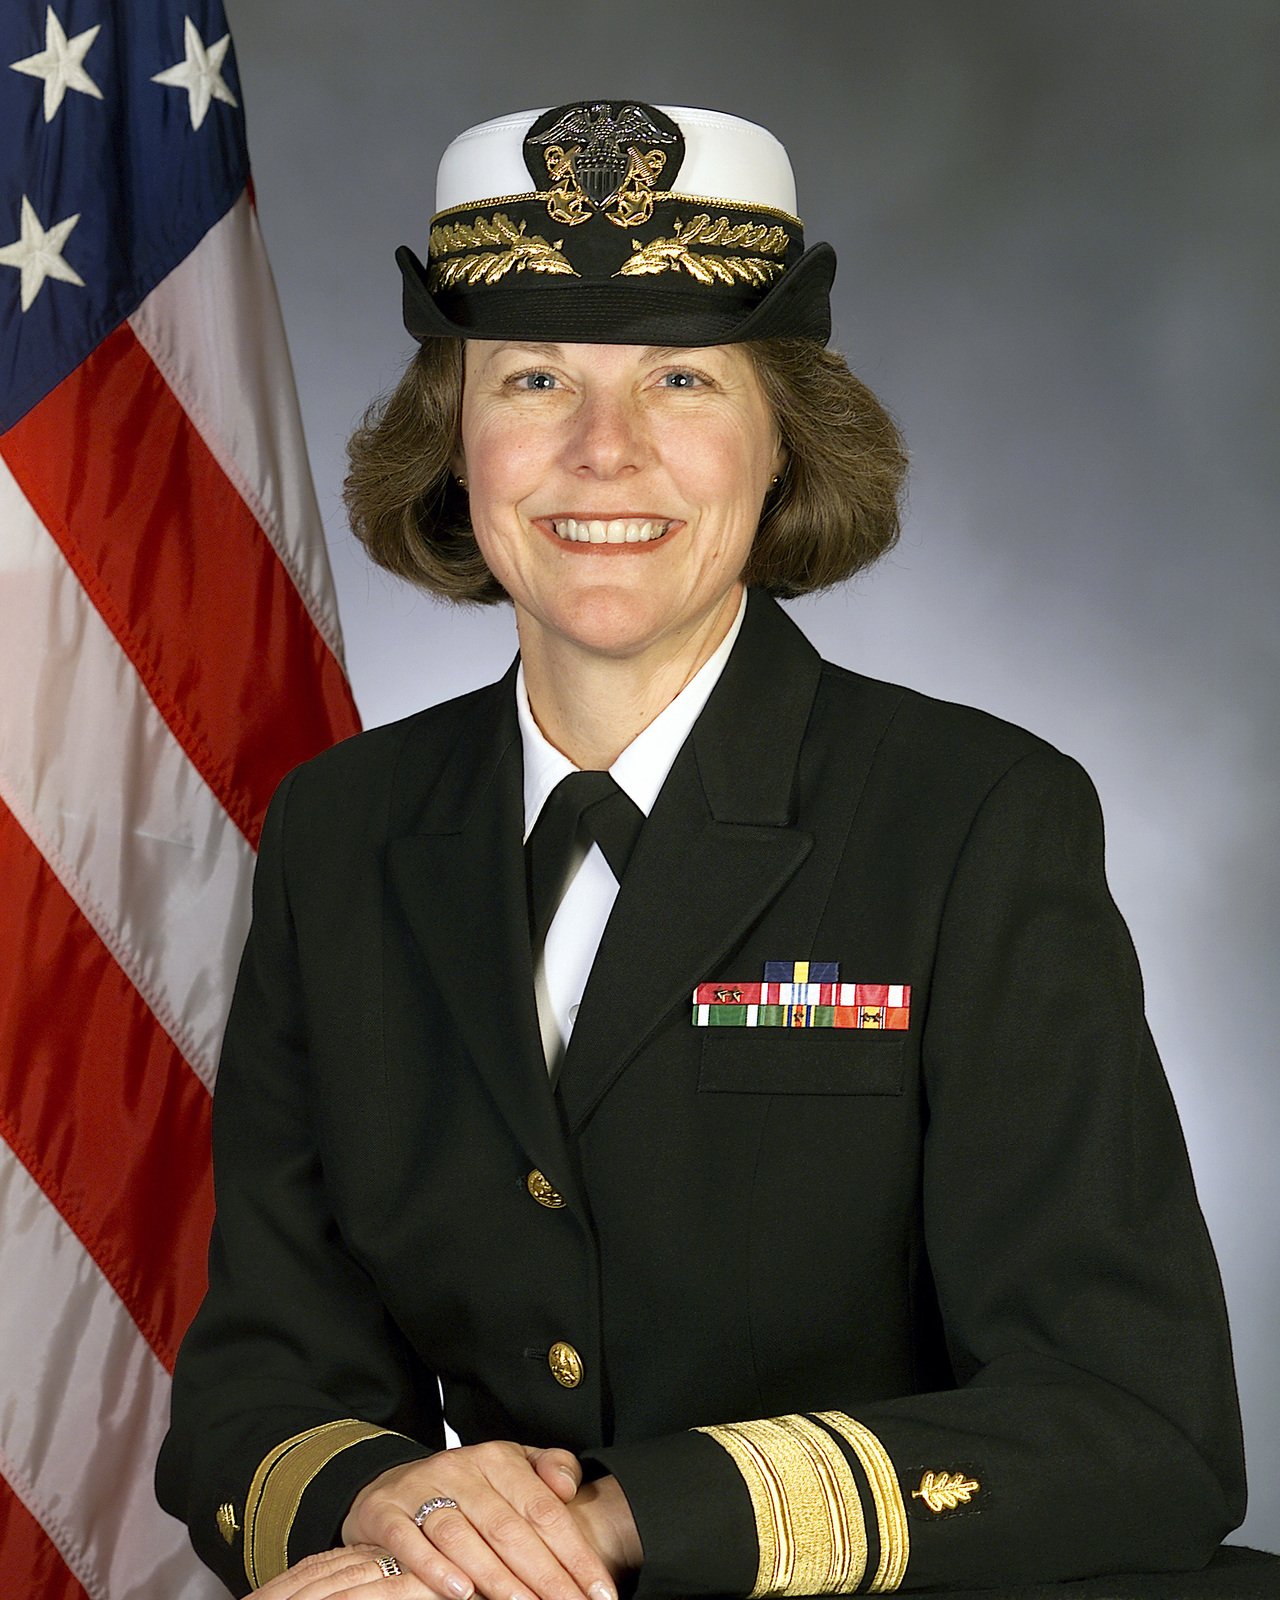 us naval war college ethics in the us navy radm carter 24 march 2014